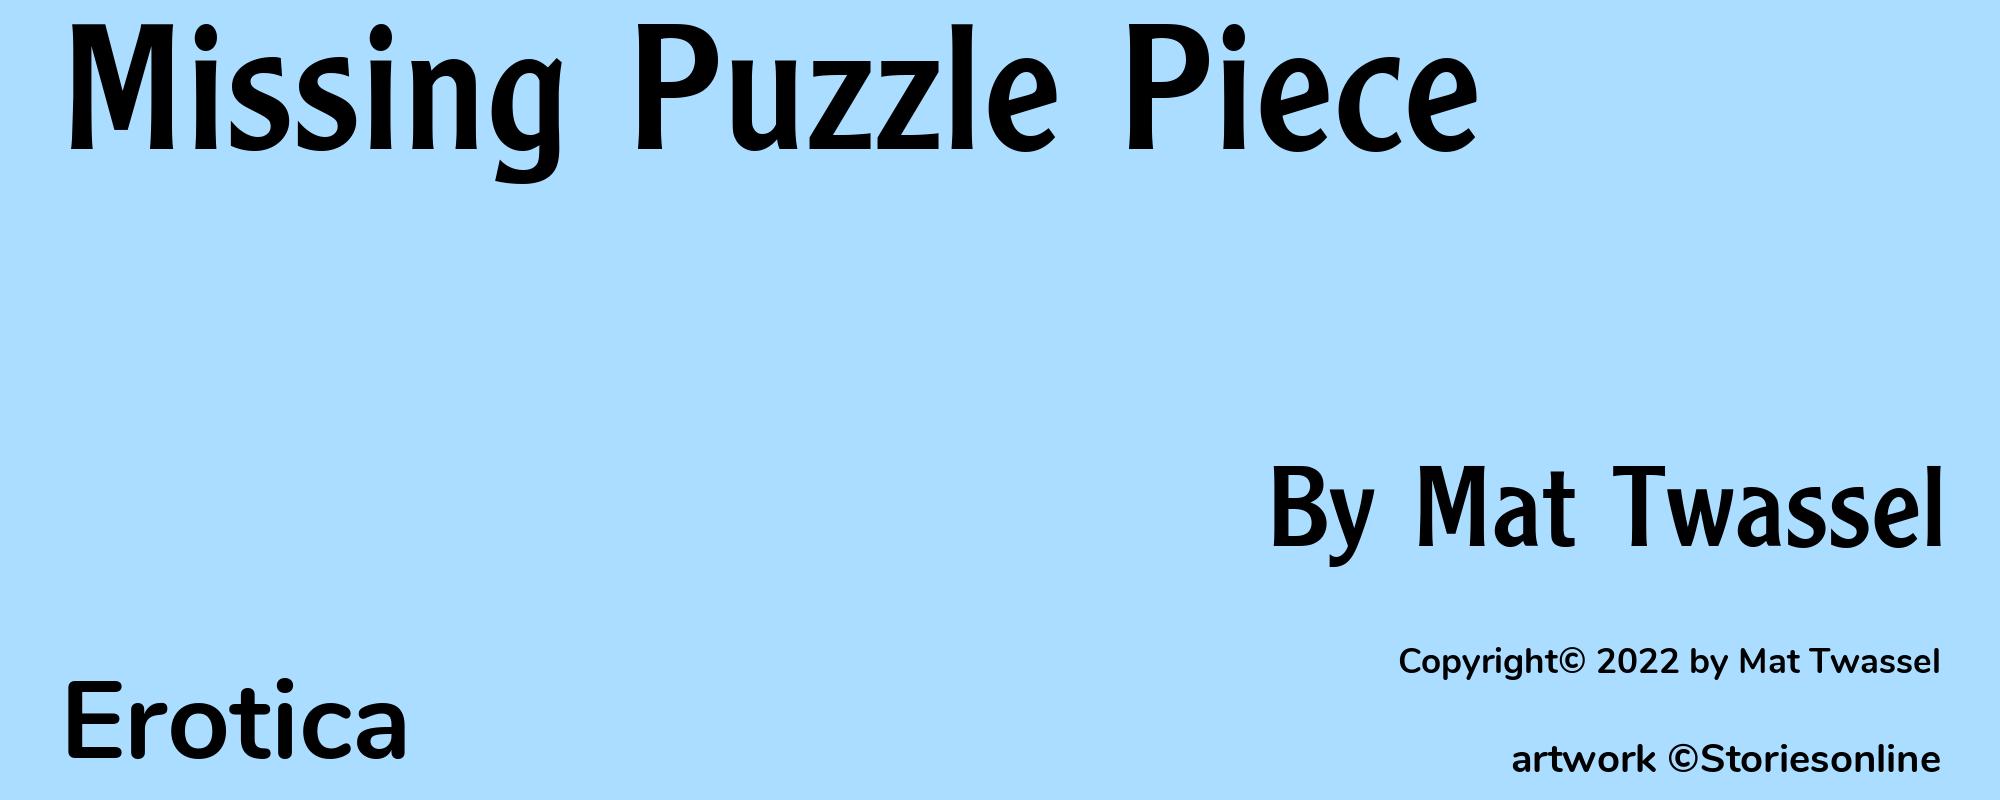 Missing Puzzle Piece - Cover